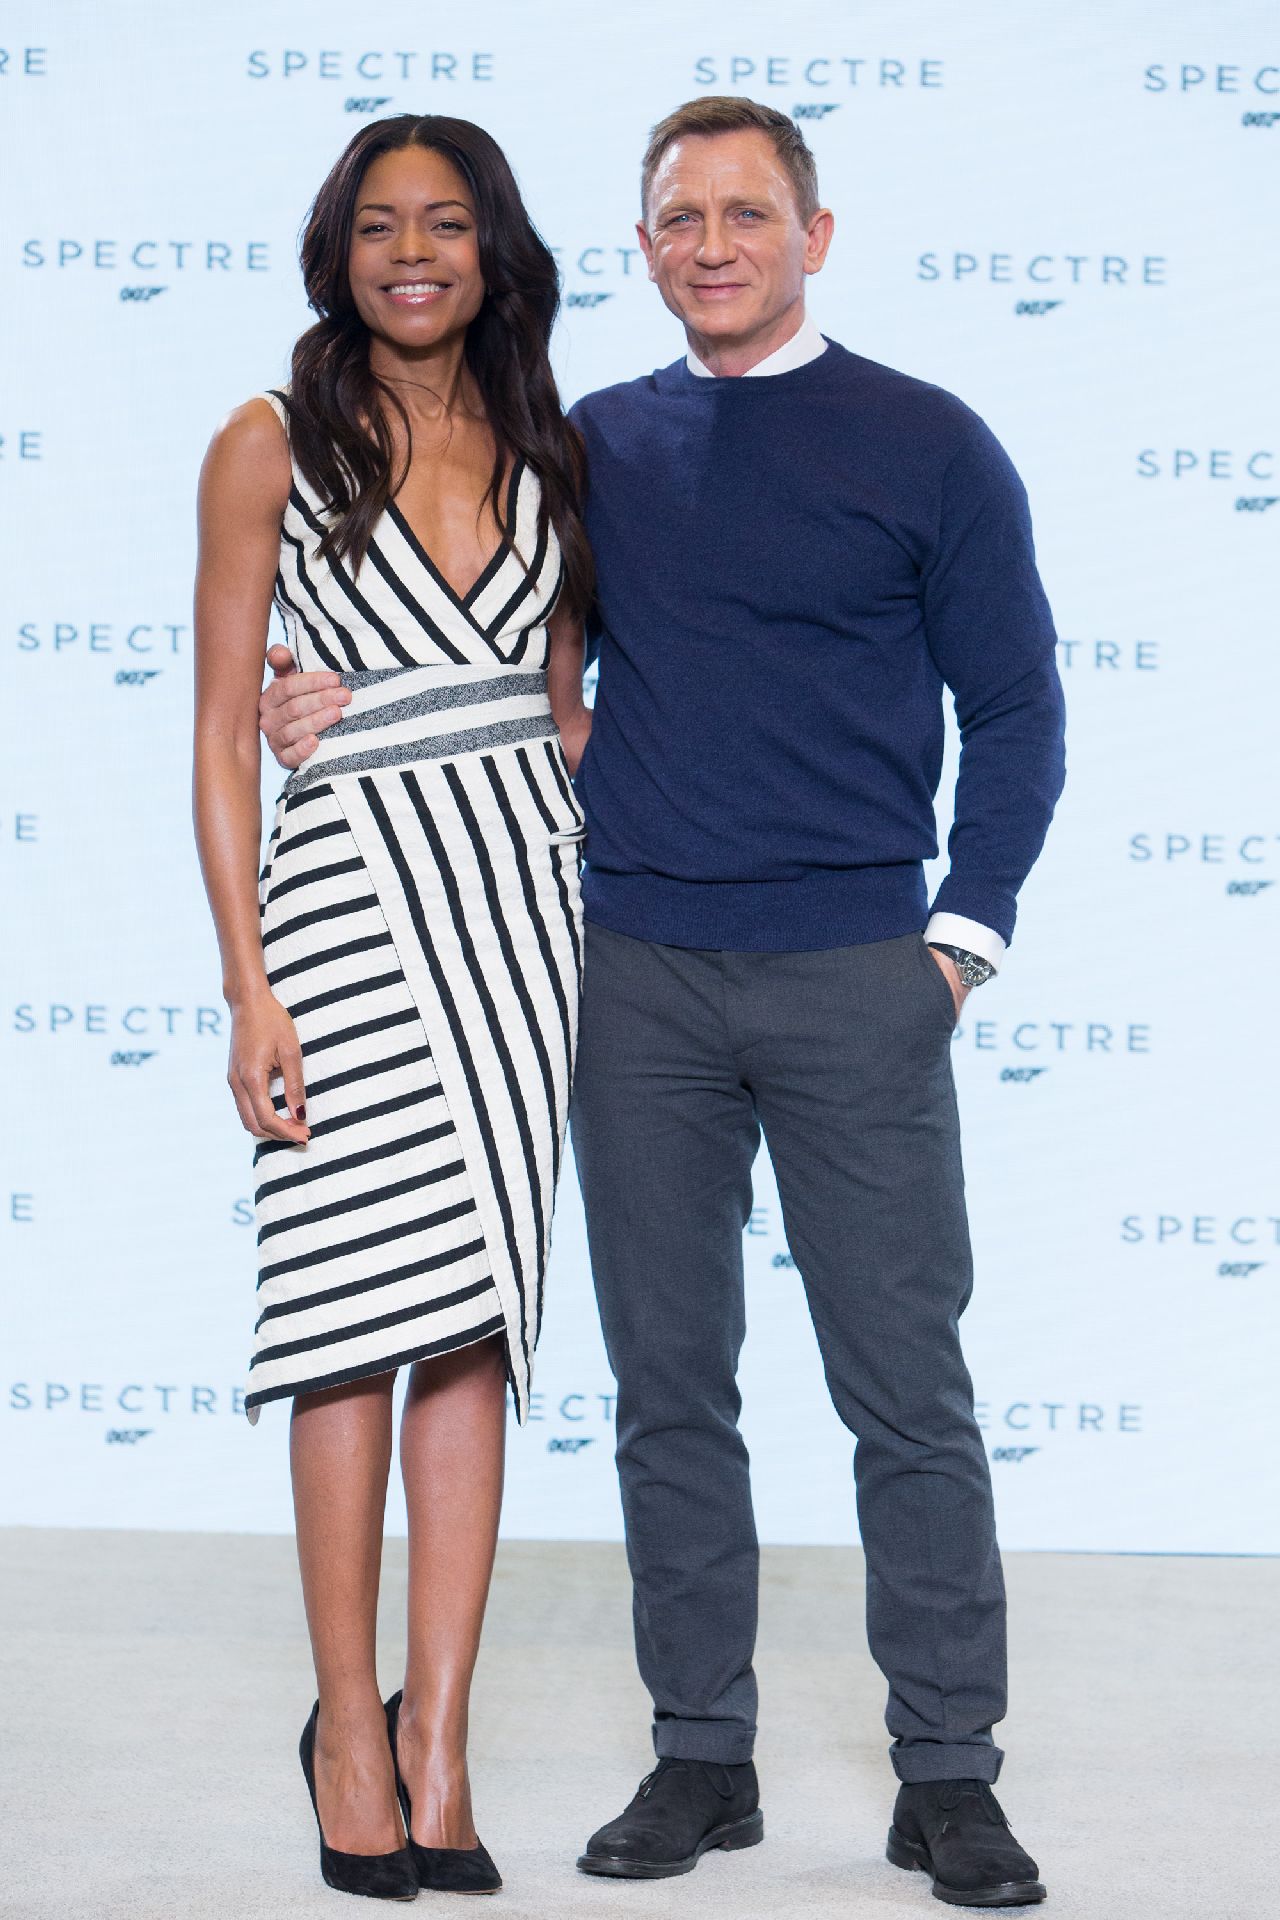 Eon Productions, Metro-Goldwyn-Mayer and Sony Pictures Entertainment announce the 24th James Bond adventure " SPECTRE. " Pictured: (L to R) Naomie Harris and Daniel Craig.